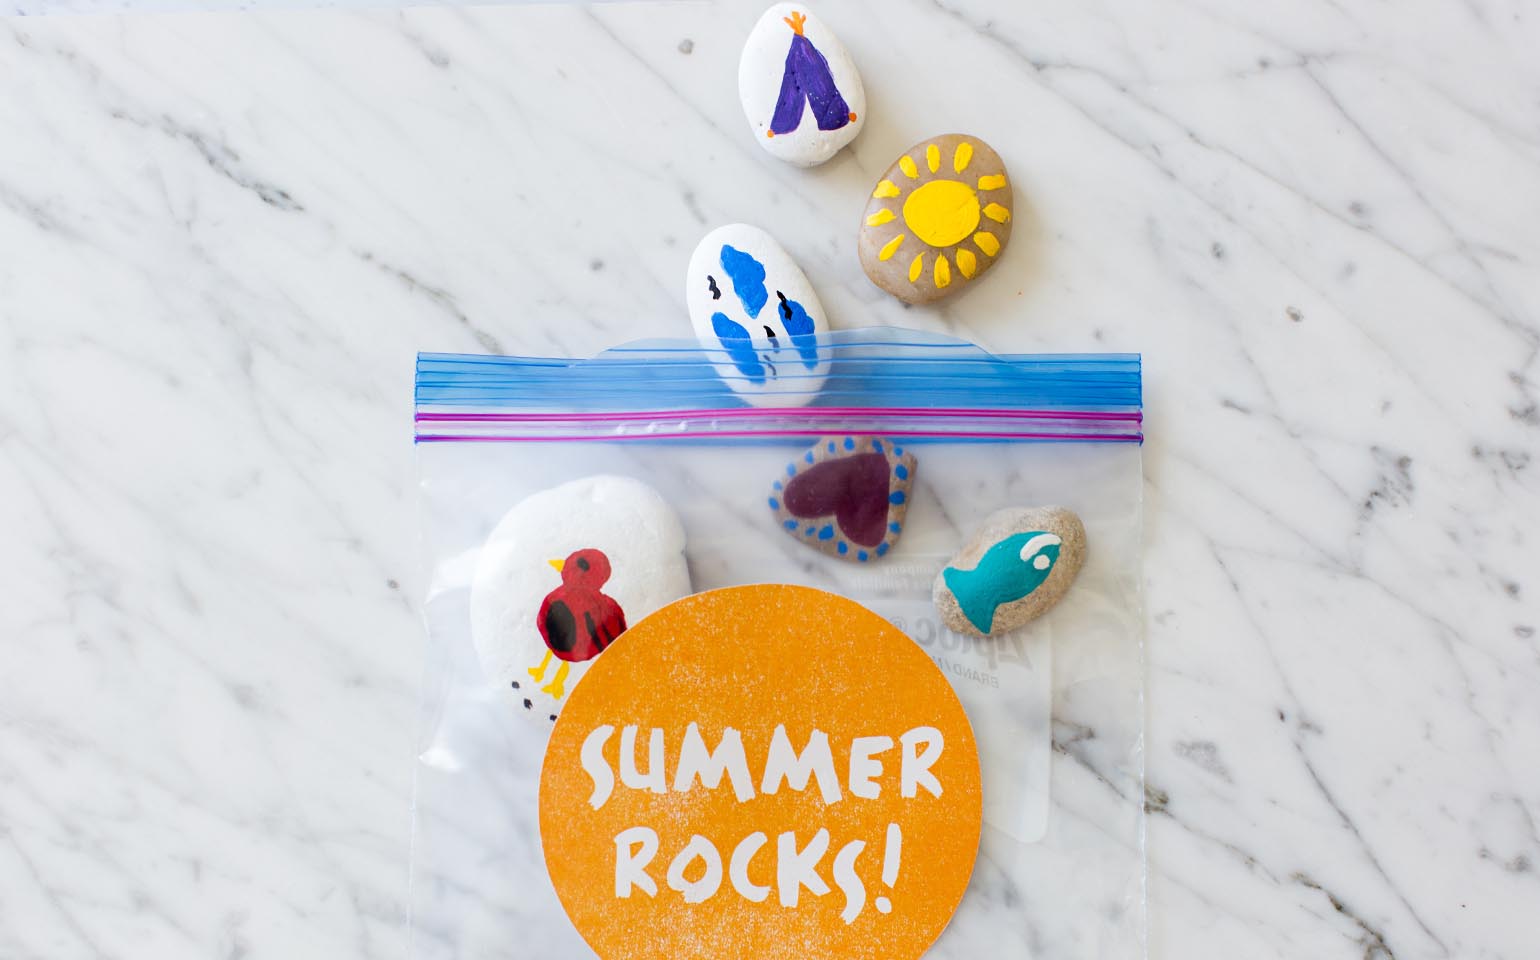 Summer Party Ideas from Ziploc® brand